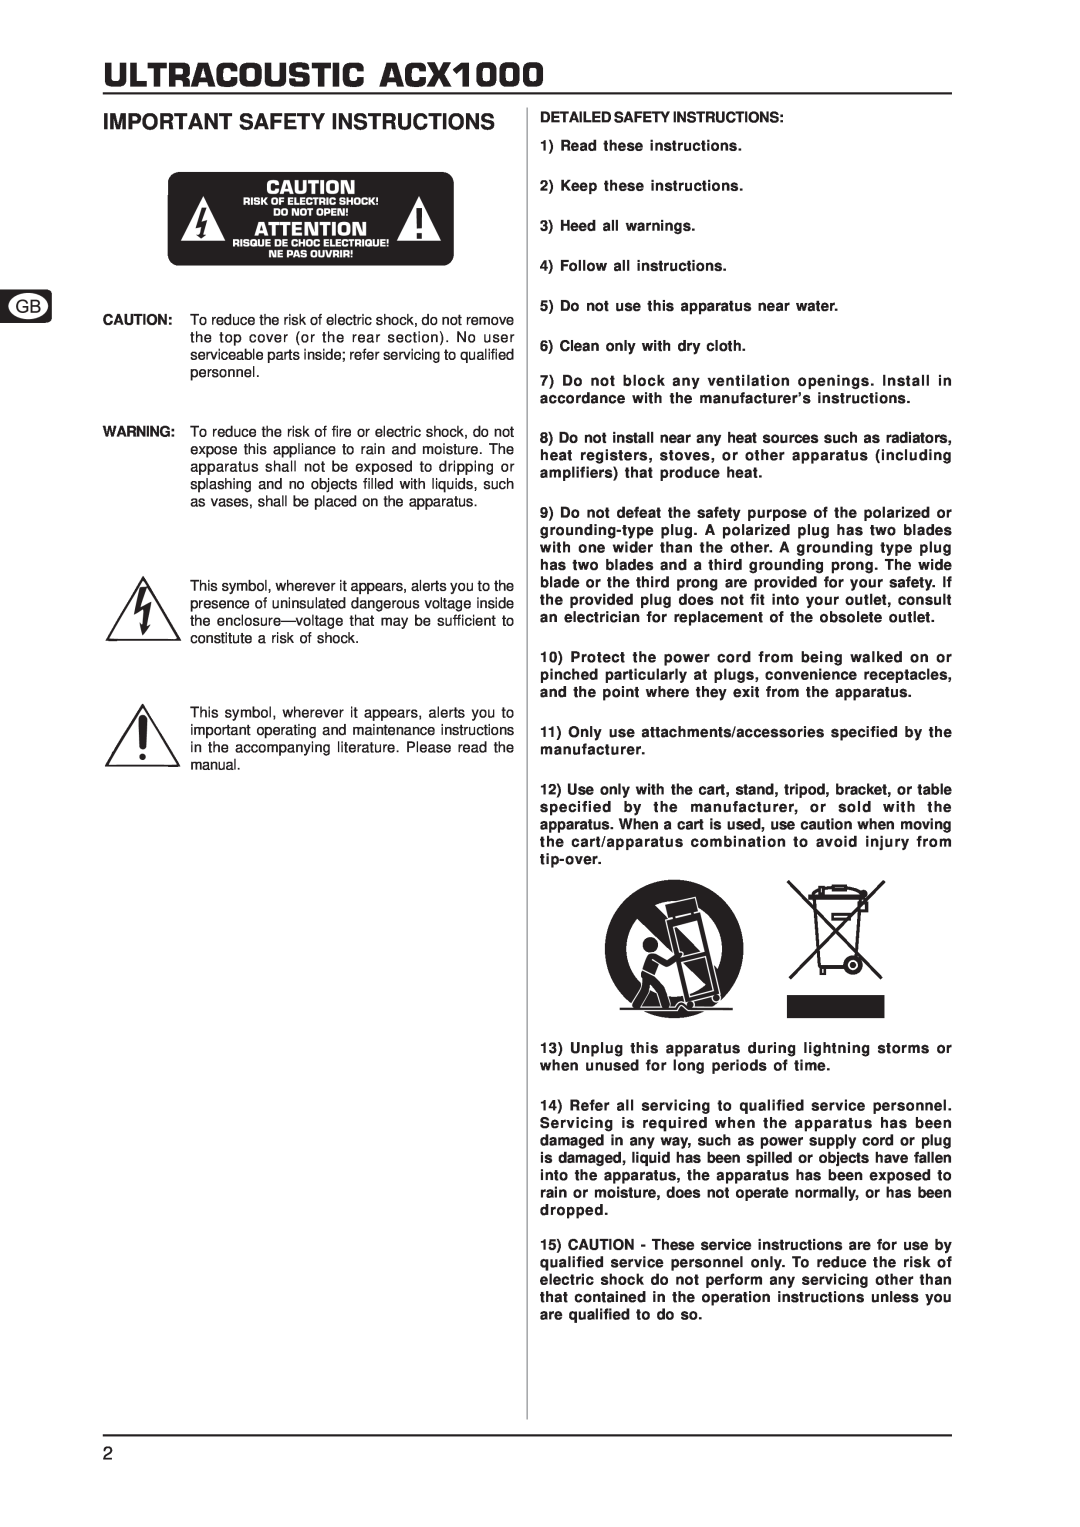 Behringer ULTRACOUSTIC ACX1000, Important Safety Instructions, DETAILED SAFETY INSTRUCTIONS 1 Read these instructions 